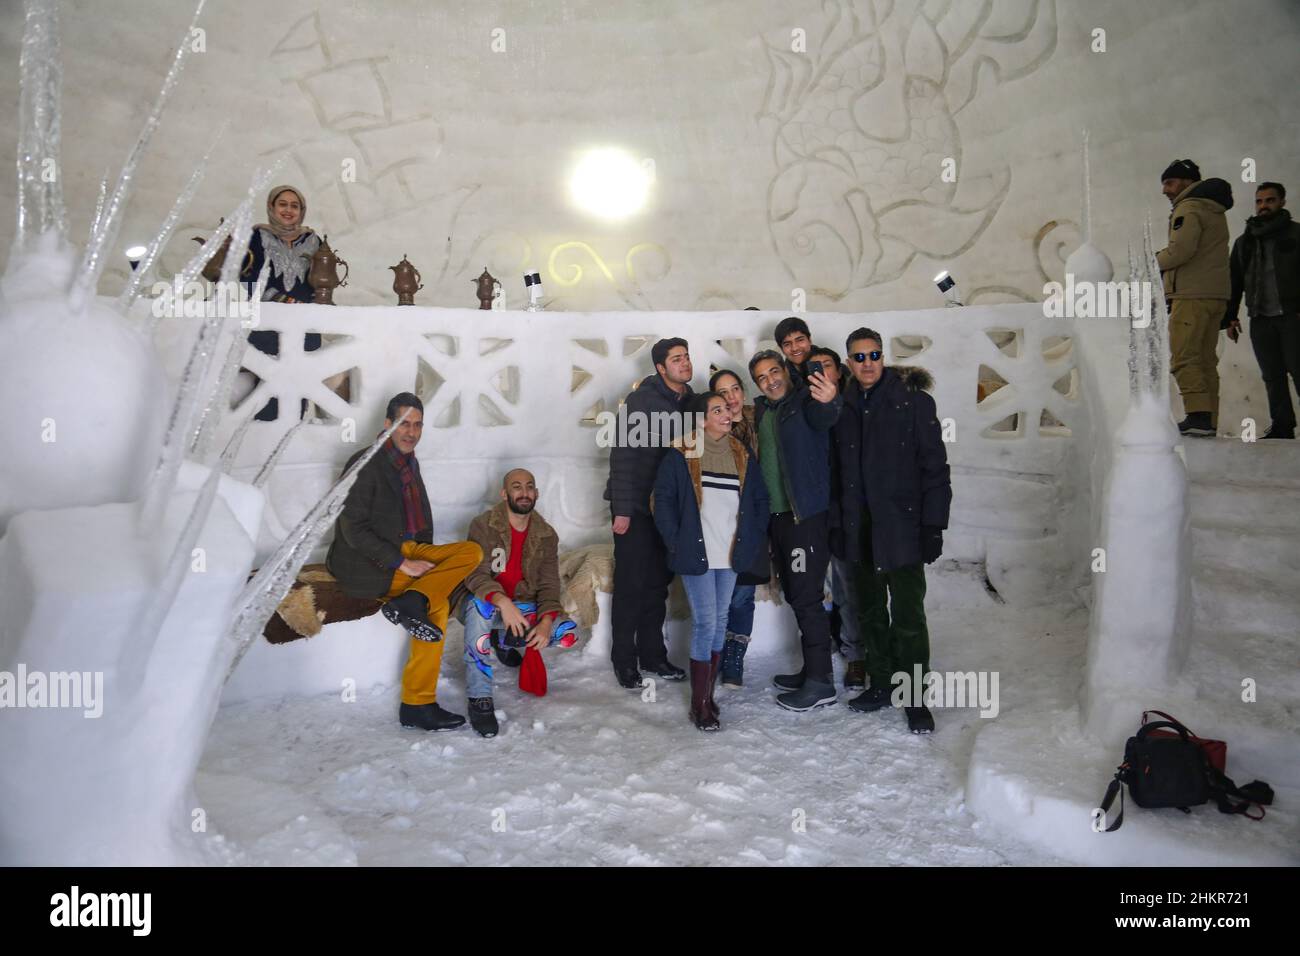 Srinagar, India. 05th Feb, 2022. Indian tourists takes selfie inside Asia's biggest Igloo Cafe made of snow in Gulmarg, Srinagar, India on February 5, 2022. The Igloo Cafe is approximately 37.5 feet tall and 45 feet round and can accommodate fifteen tables and around 60 guests. The Igloo Cafe offers tables made of ice and snow, with hot dishes served to visitors. (Photo by Sajad Hameed/Pacific Press/Sipa USA) Credit: Sipa USA/Alamy Live News Stock Photo